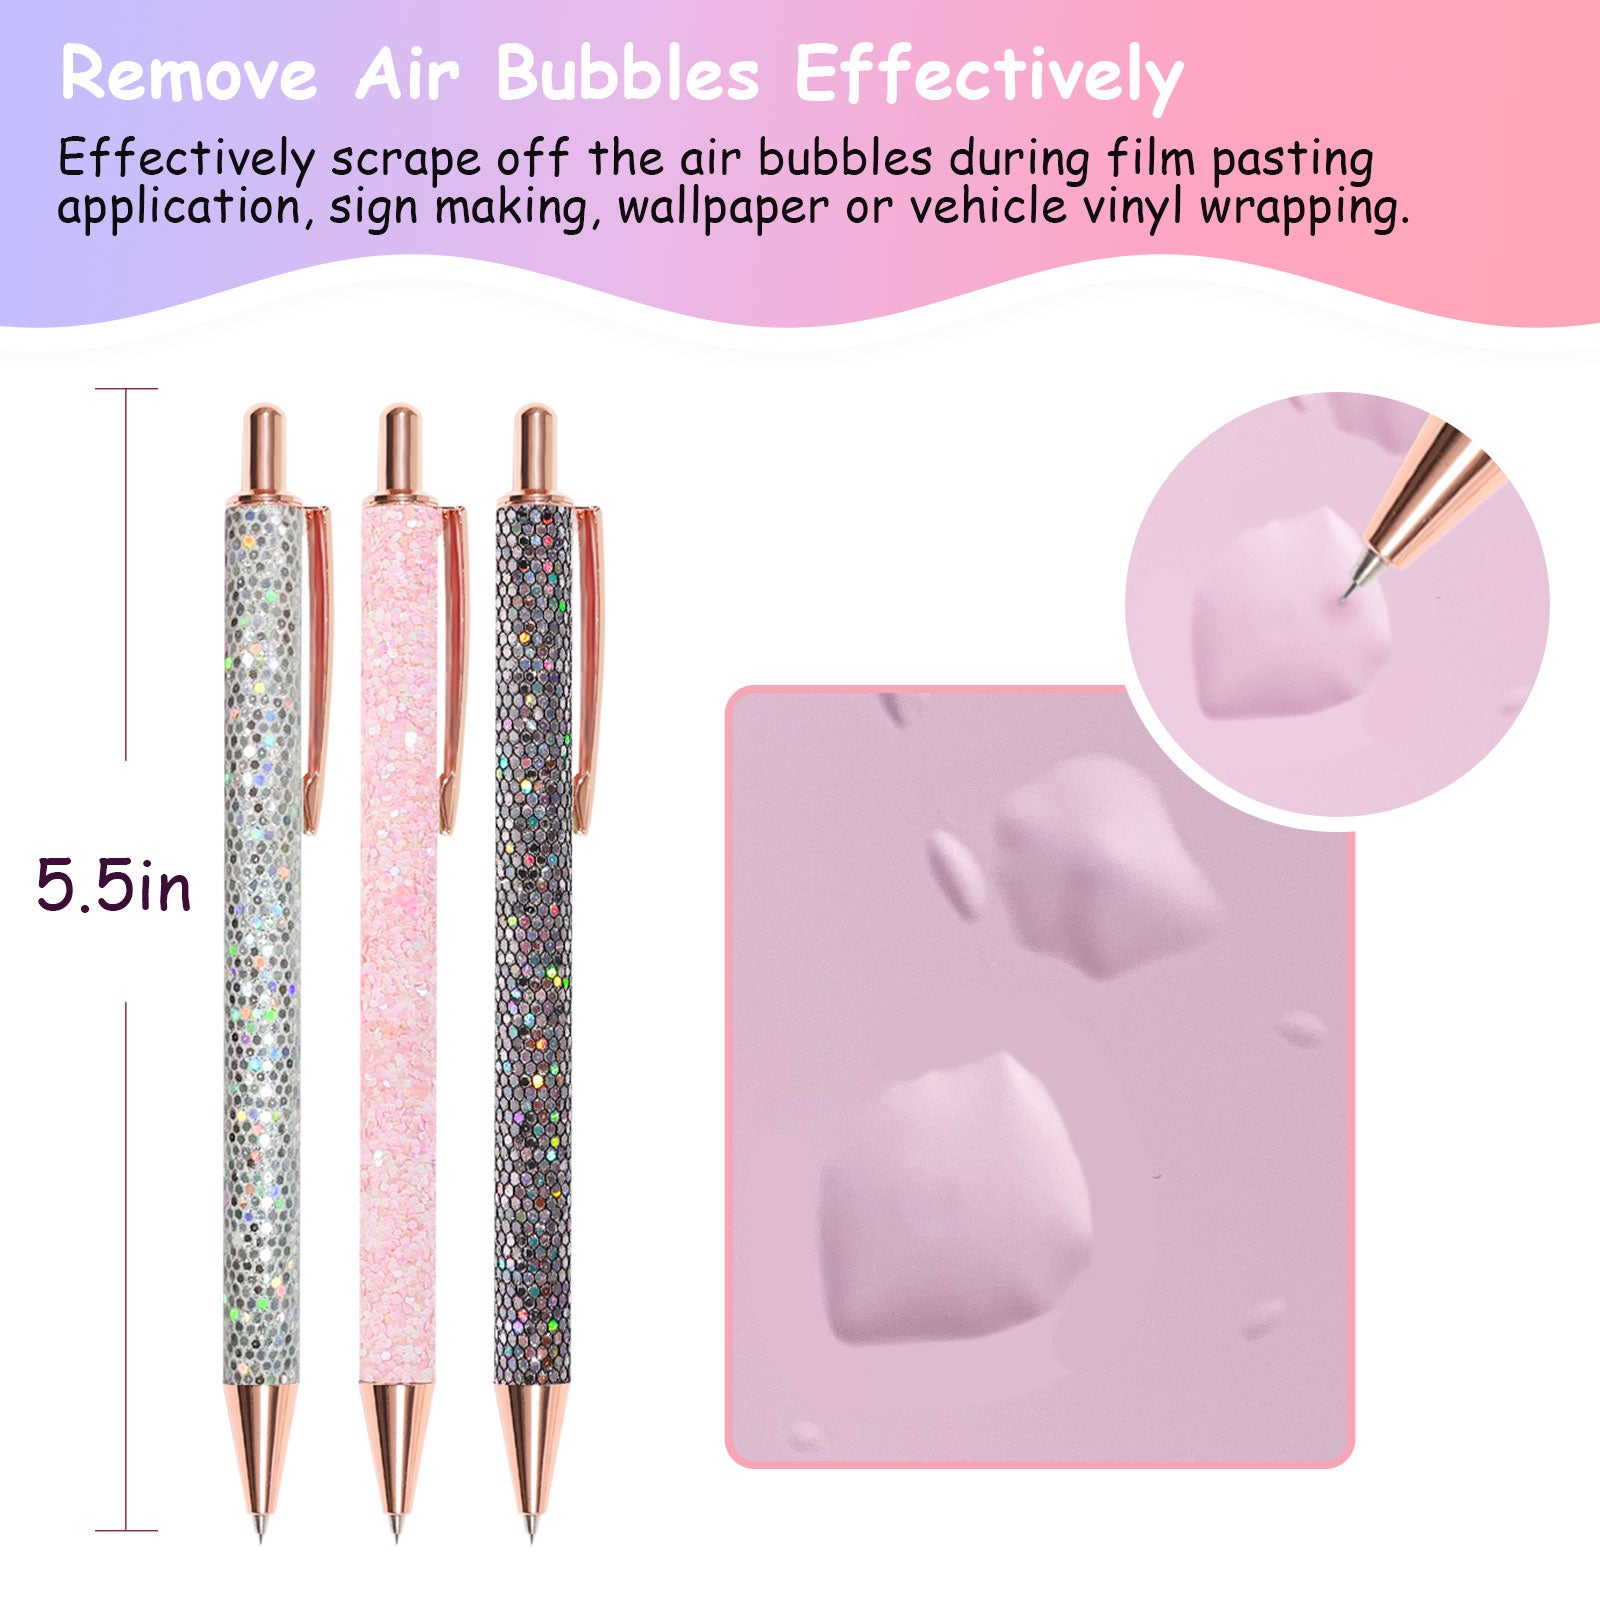  4 Piece Air Release Weeding Pen Craft Retractable Adhesive  Vinyl Tool Glitter Pin Weed Pen Stainless Steel Weeding Tools for Vinyl Pin  Pen for Bubble Removal DIY Craft Project(Glitter Color) 